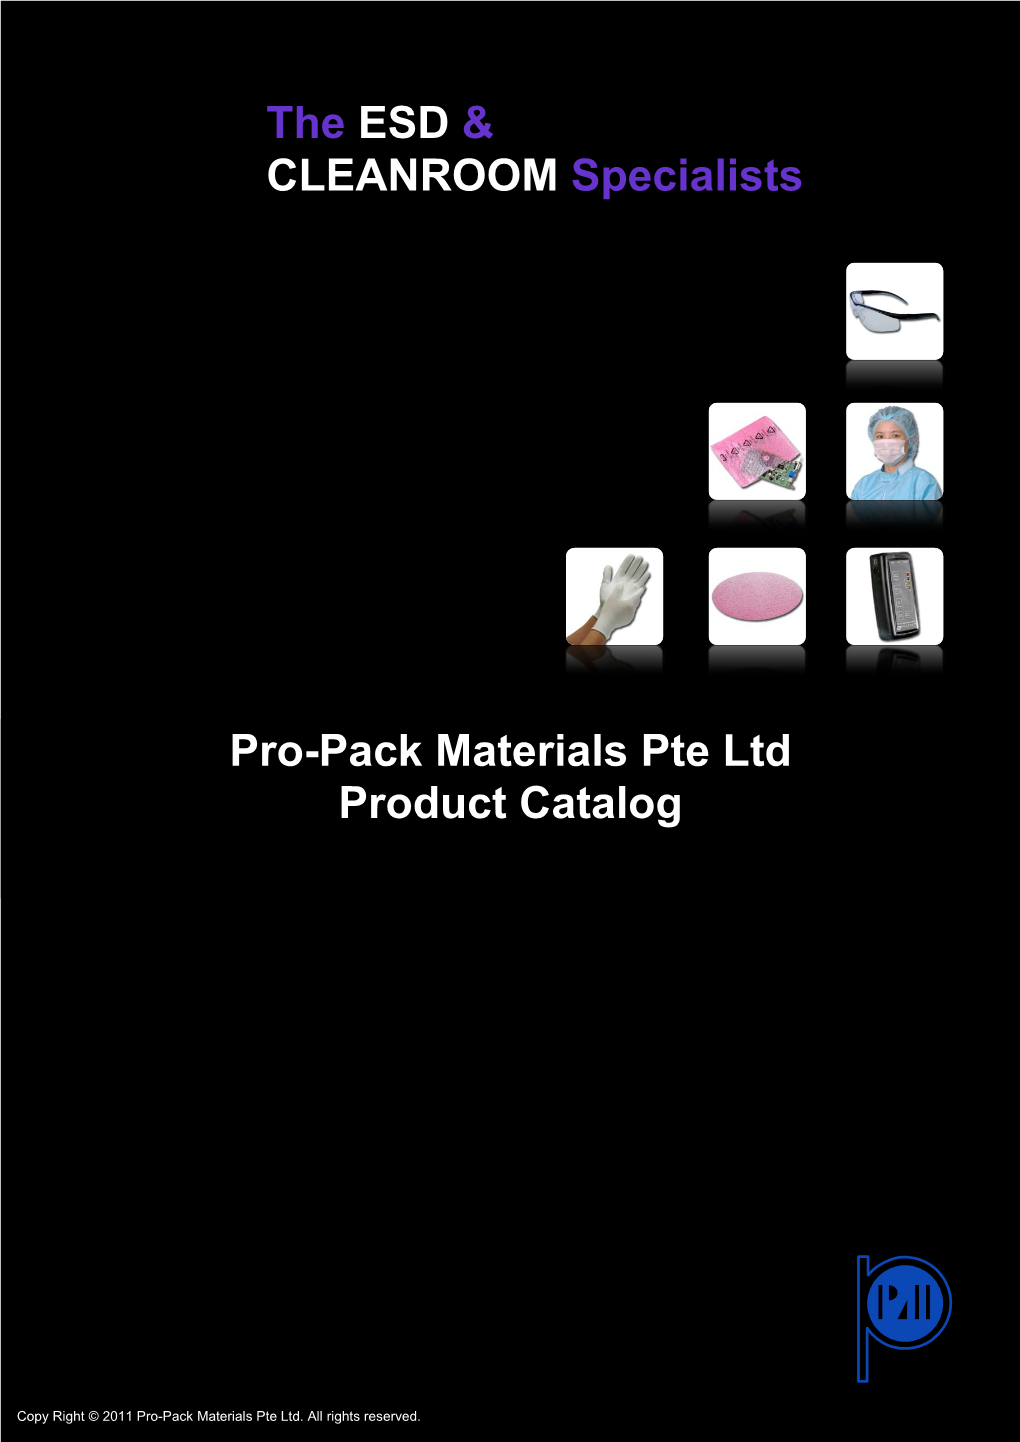 The ESD & CLEANROOM Specialists Pro-Pack Materials Pte Ltd Product